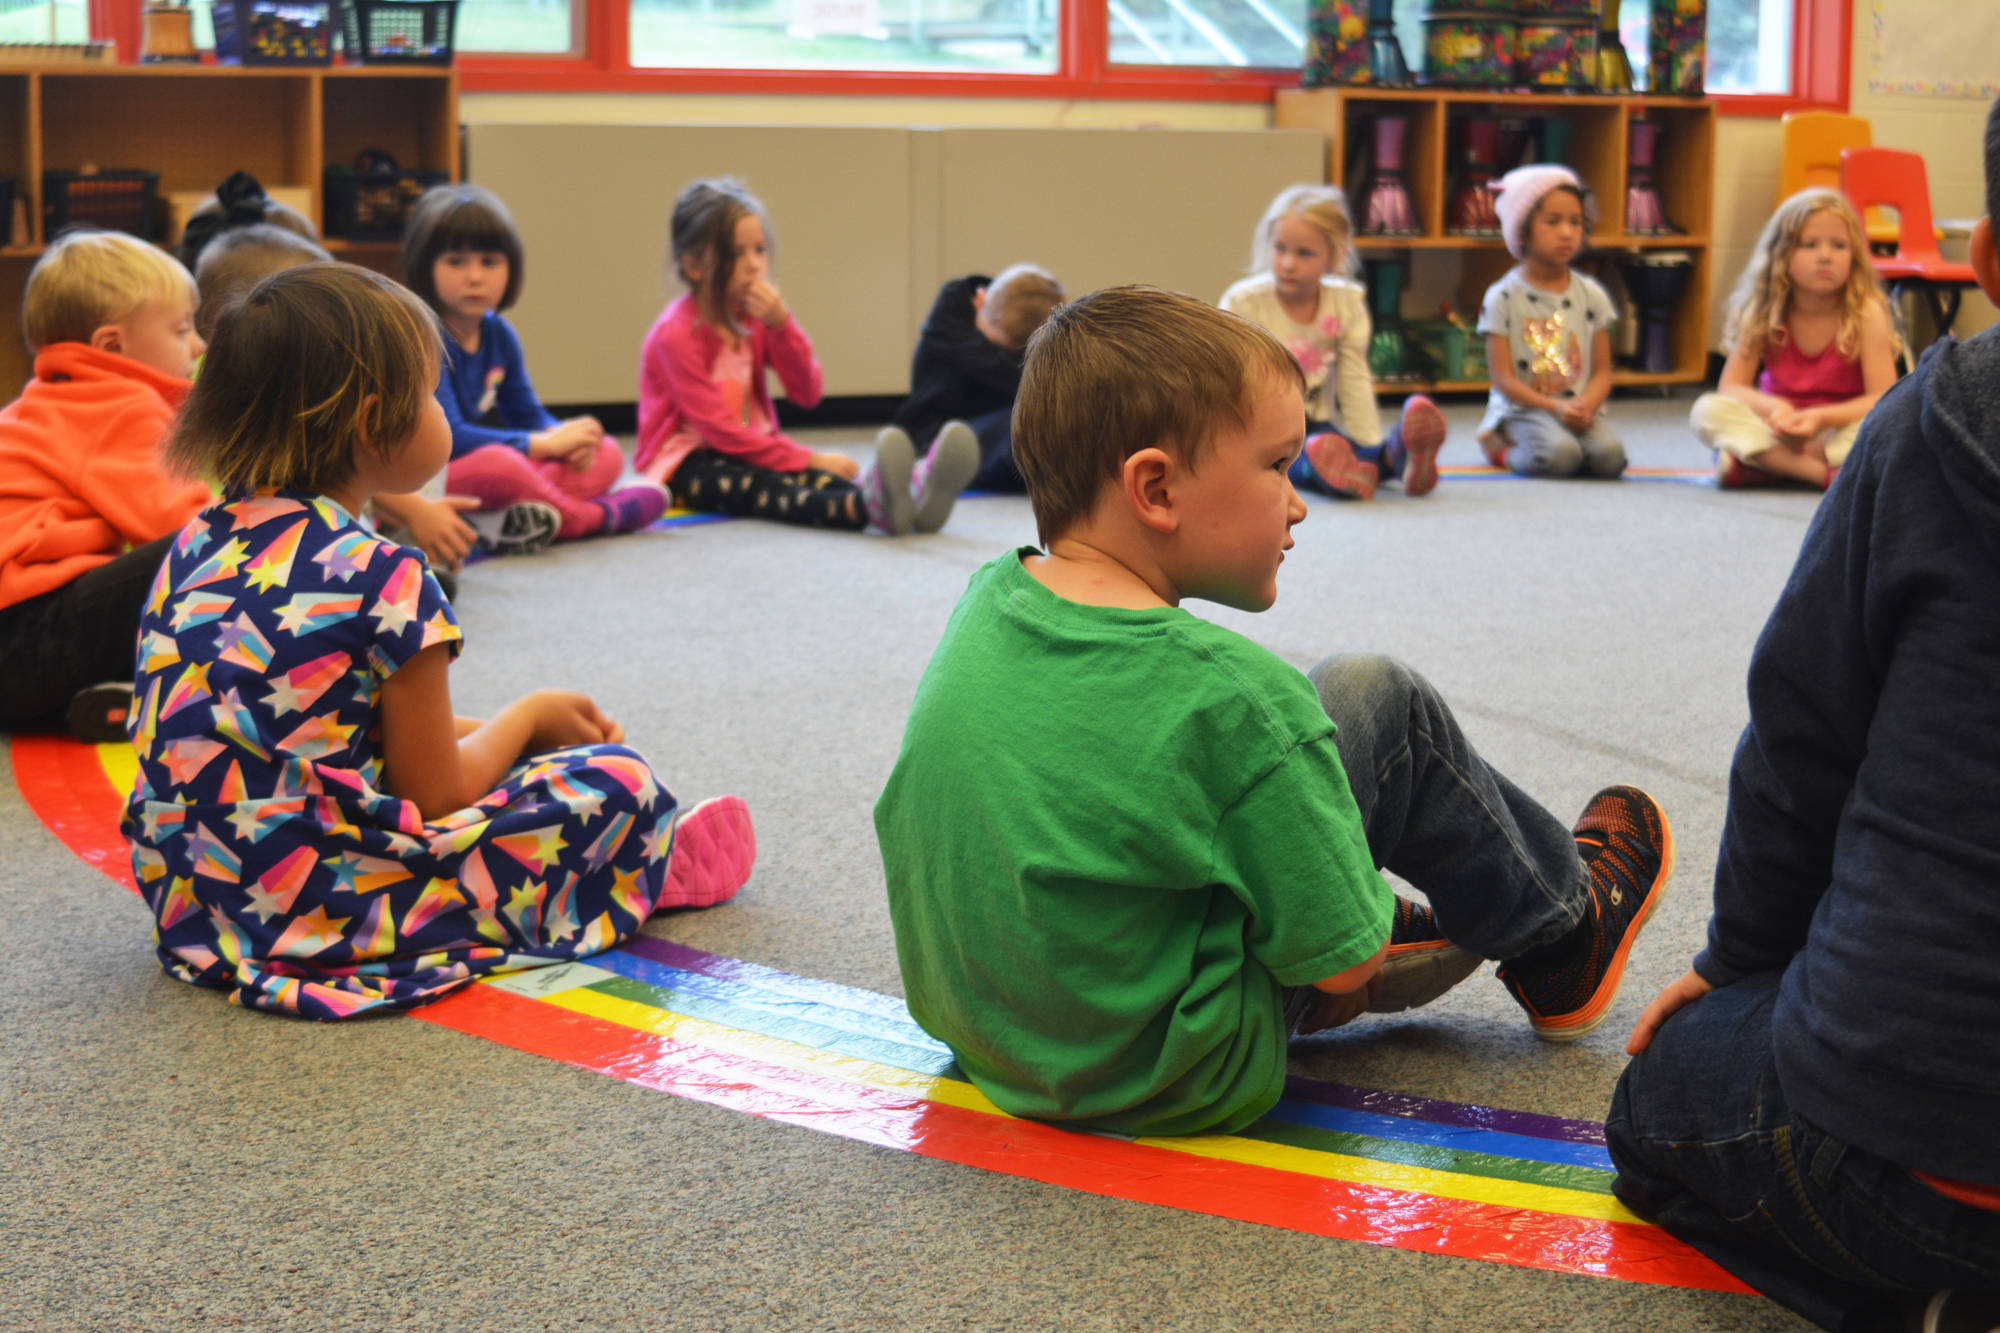 Kindergartener Elijah Ralph glances over at this classmate during a music class on the first day of school Tuesday, Aug. 22, 2017 at Paul Banks Elementary in Homer, Alaska. (Photo by Megan Pacer/Homer News)